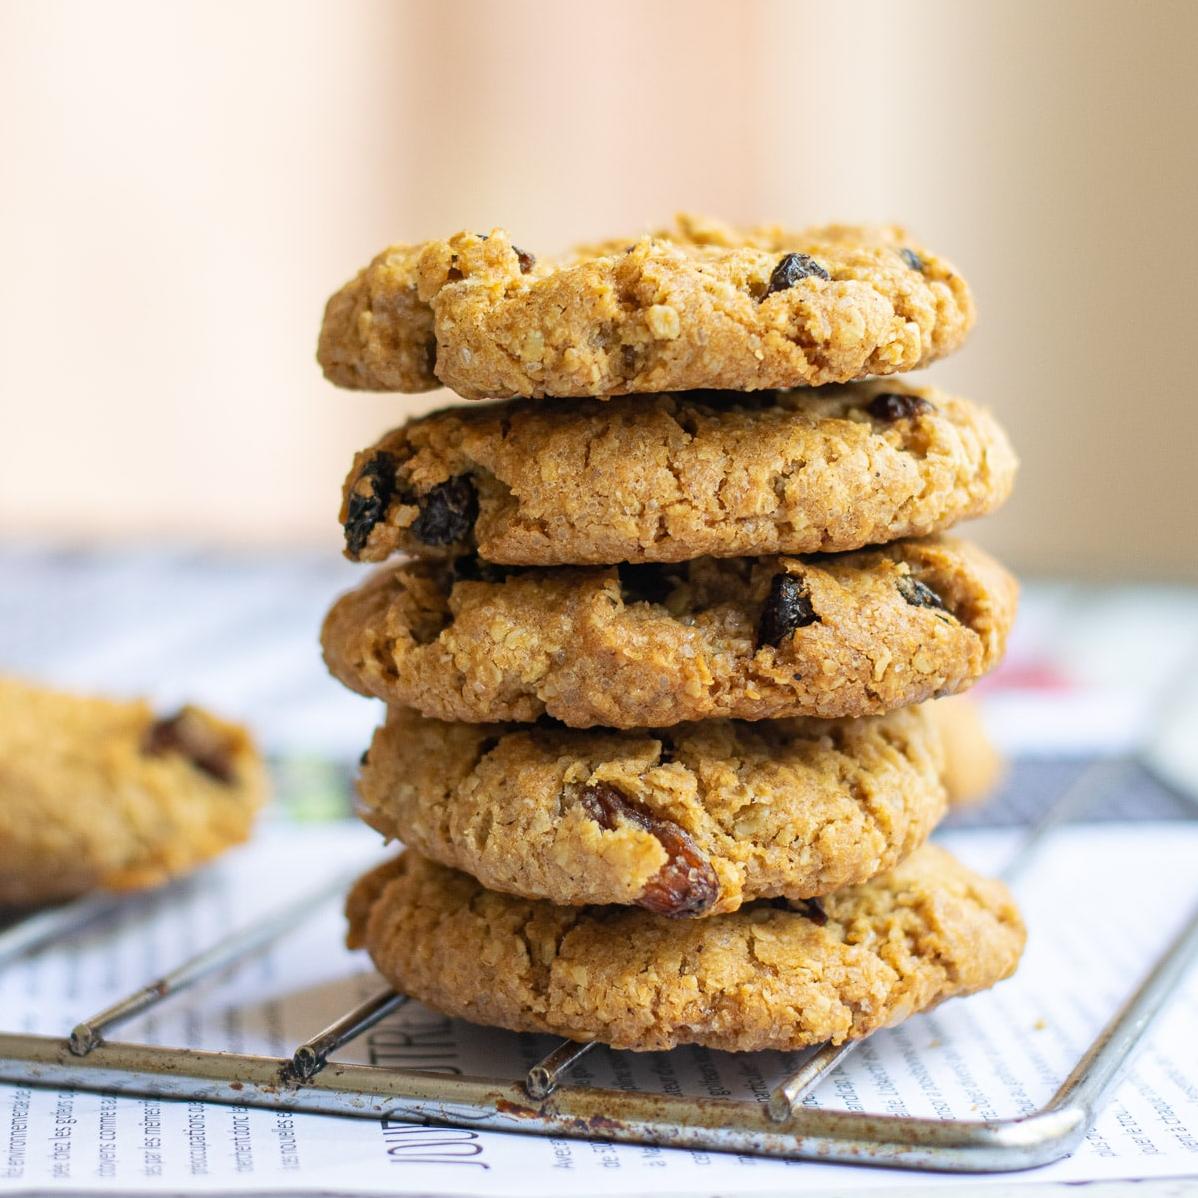  These vegan oatmeal raisin cookies are the perfect afternoon treat!